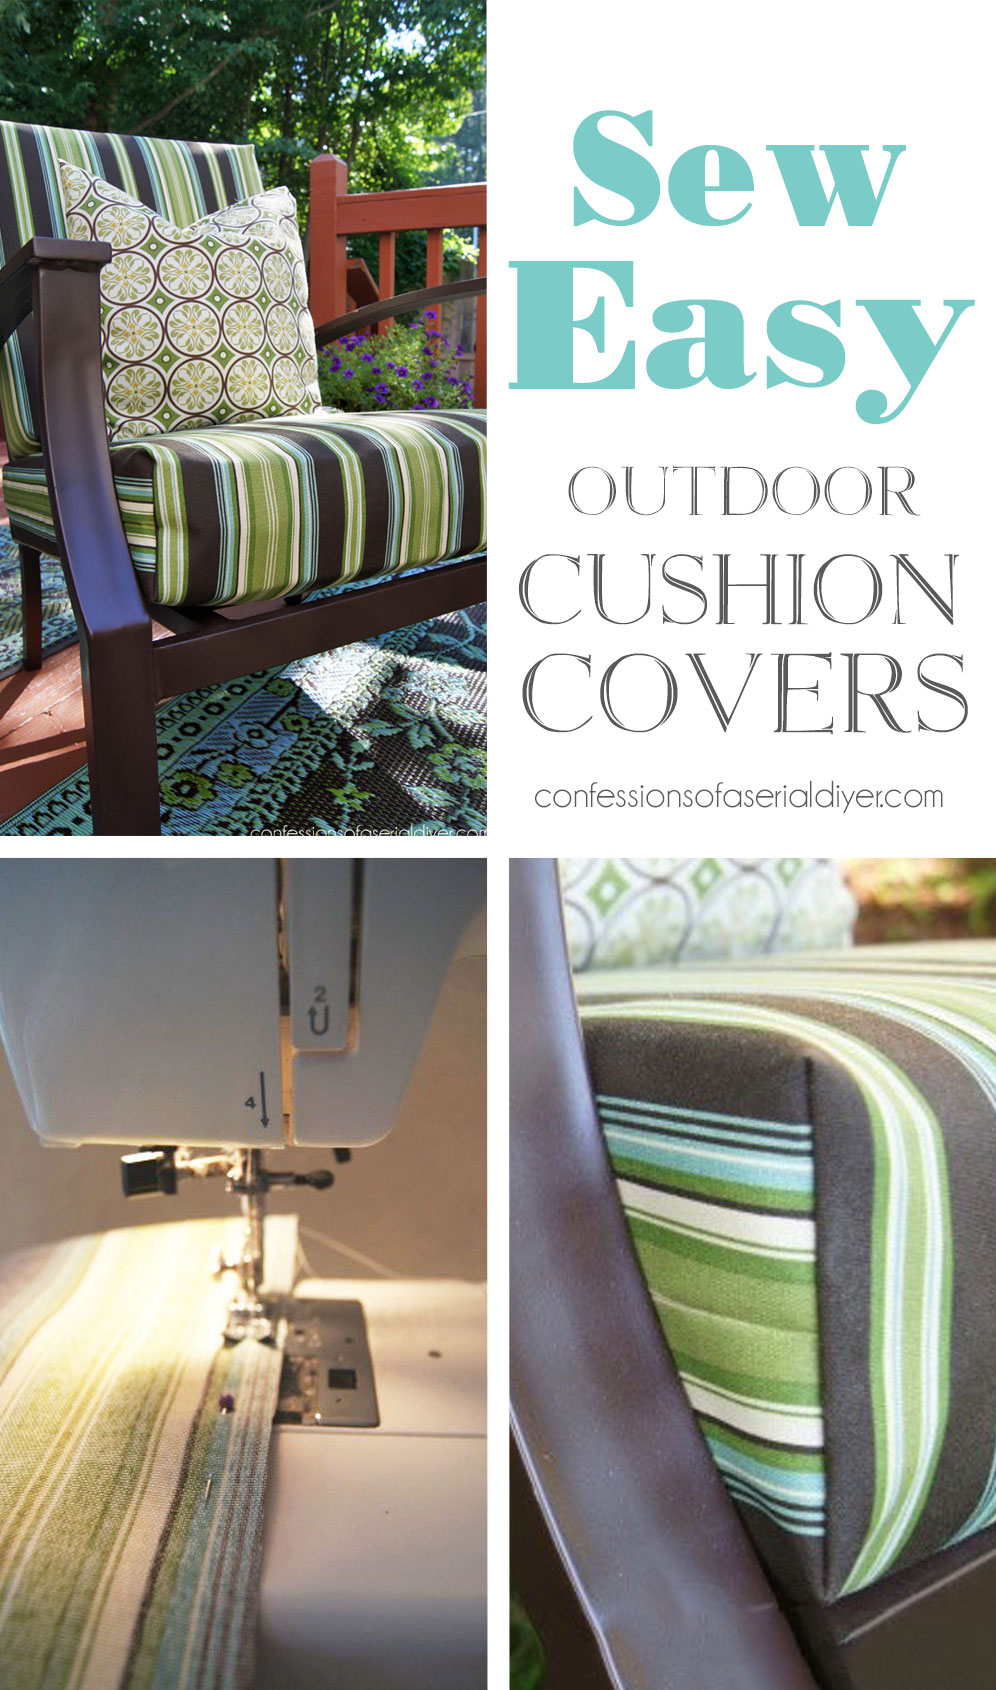 Sew Easy Outdoor Cushion Covers, How To Make Replacement Covers For Outdoor Cushions